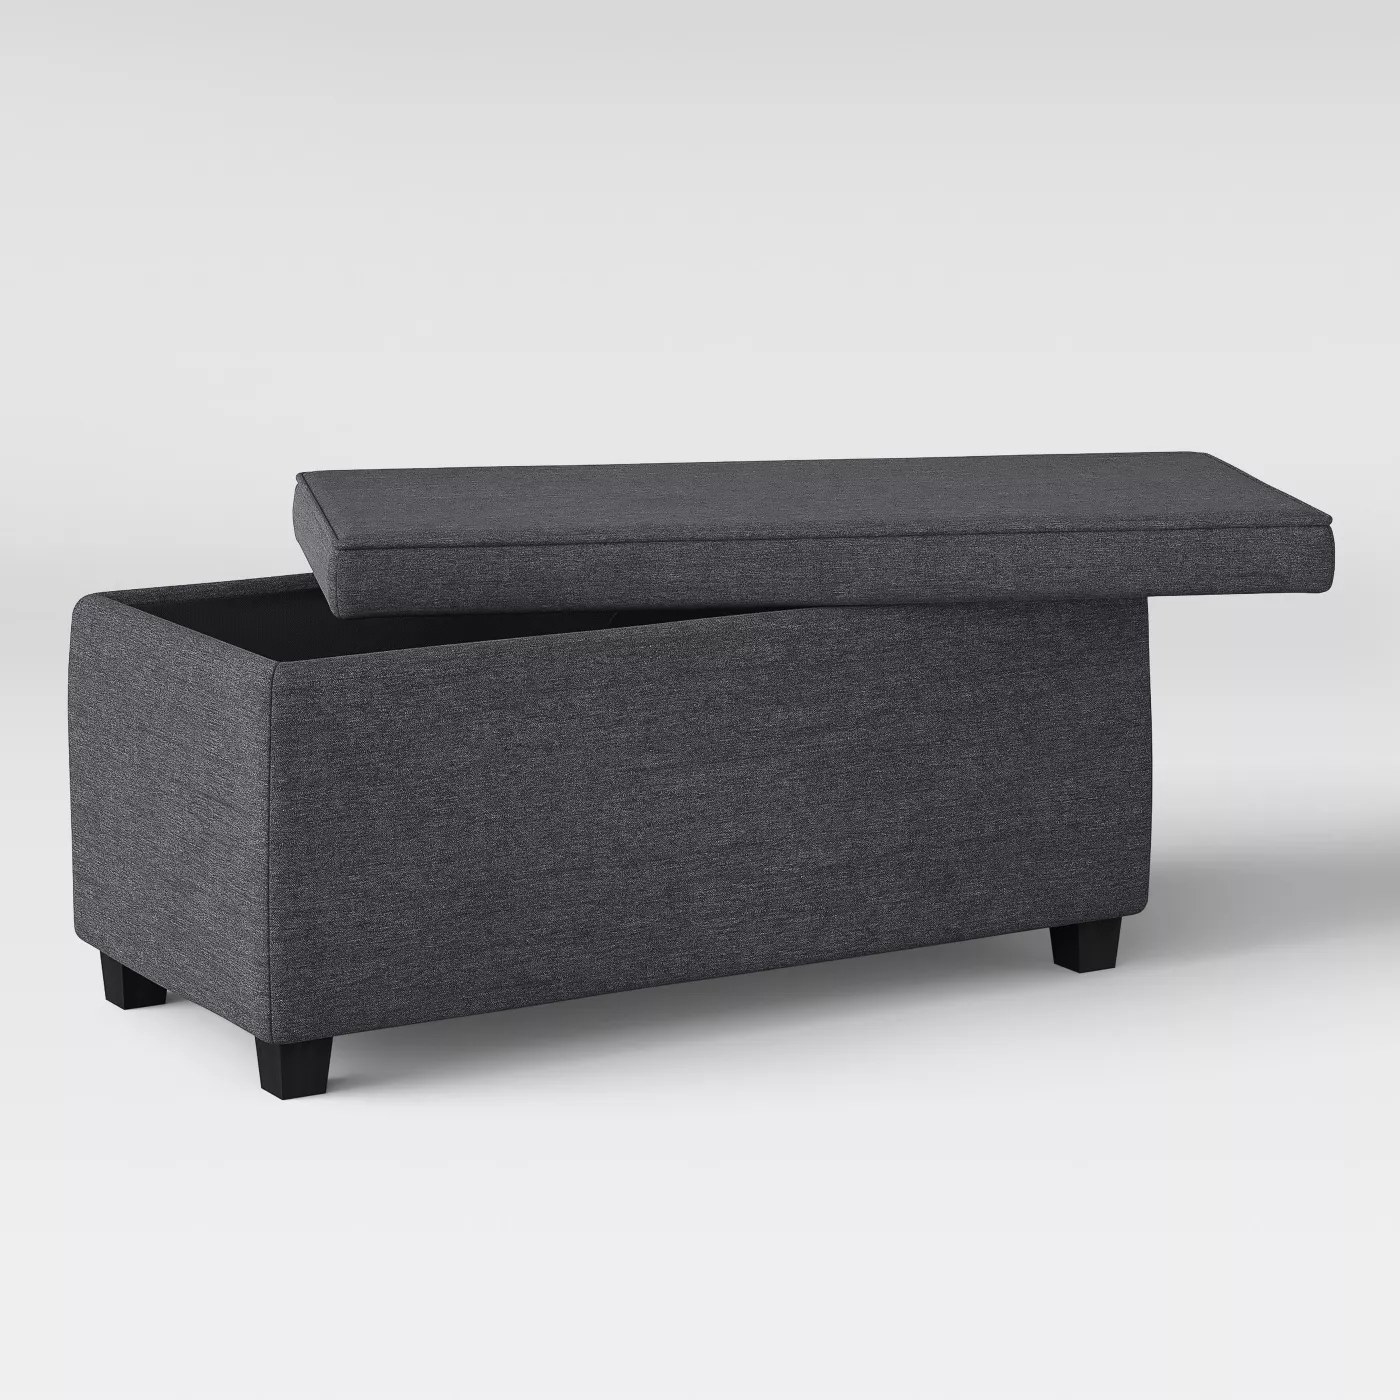 The rectangular ottoman with storage underneath the seat